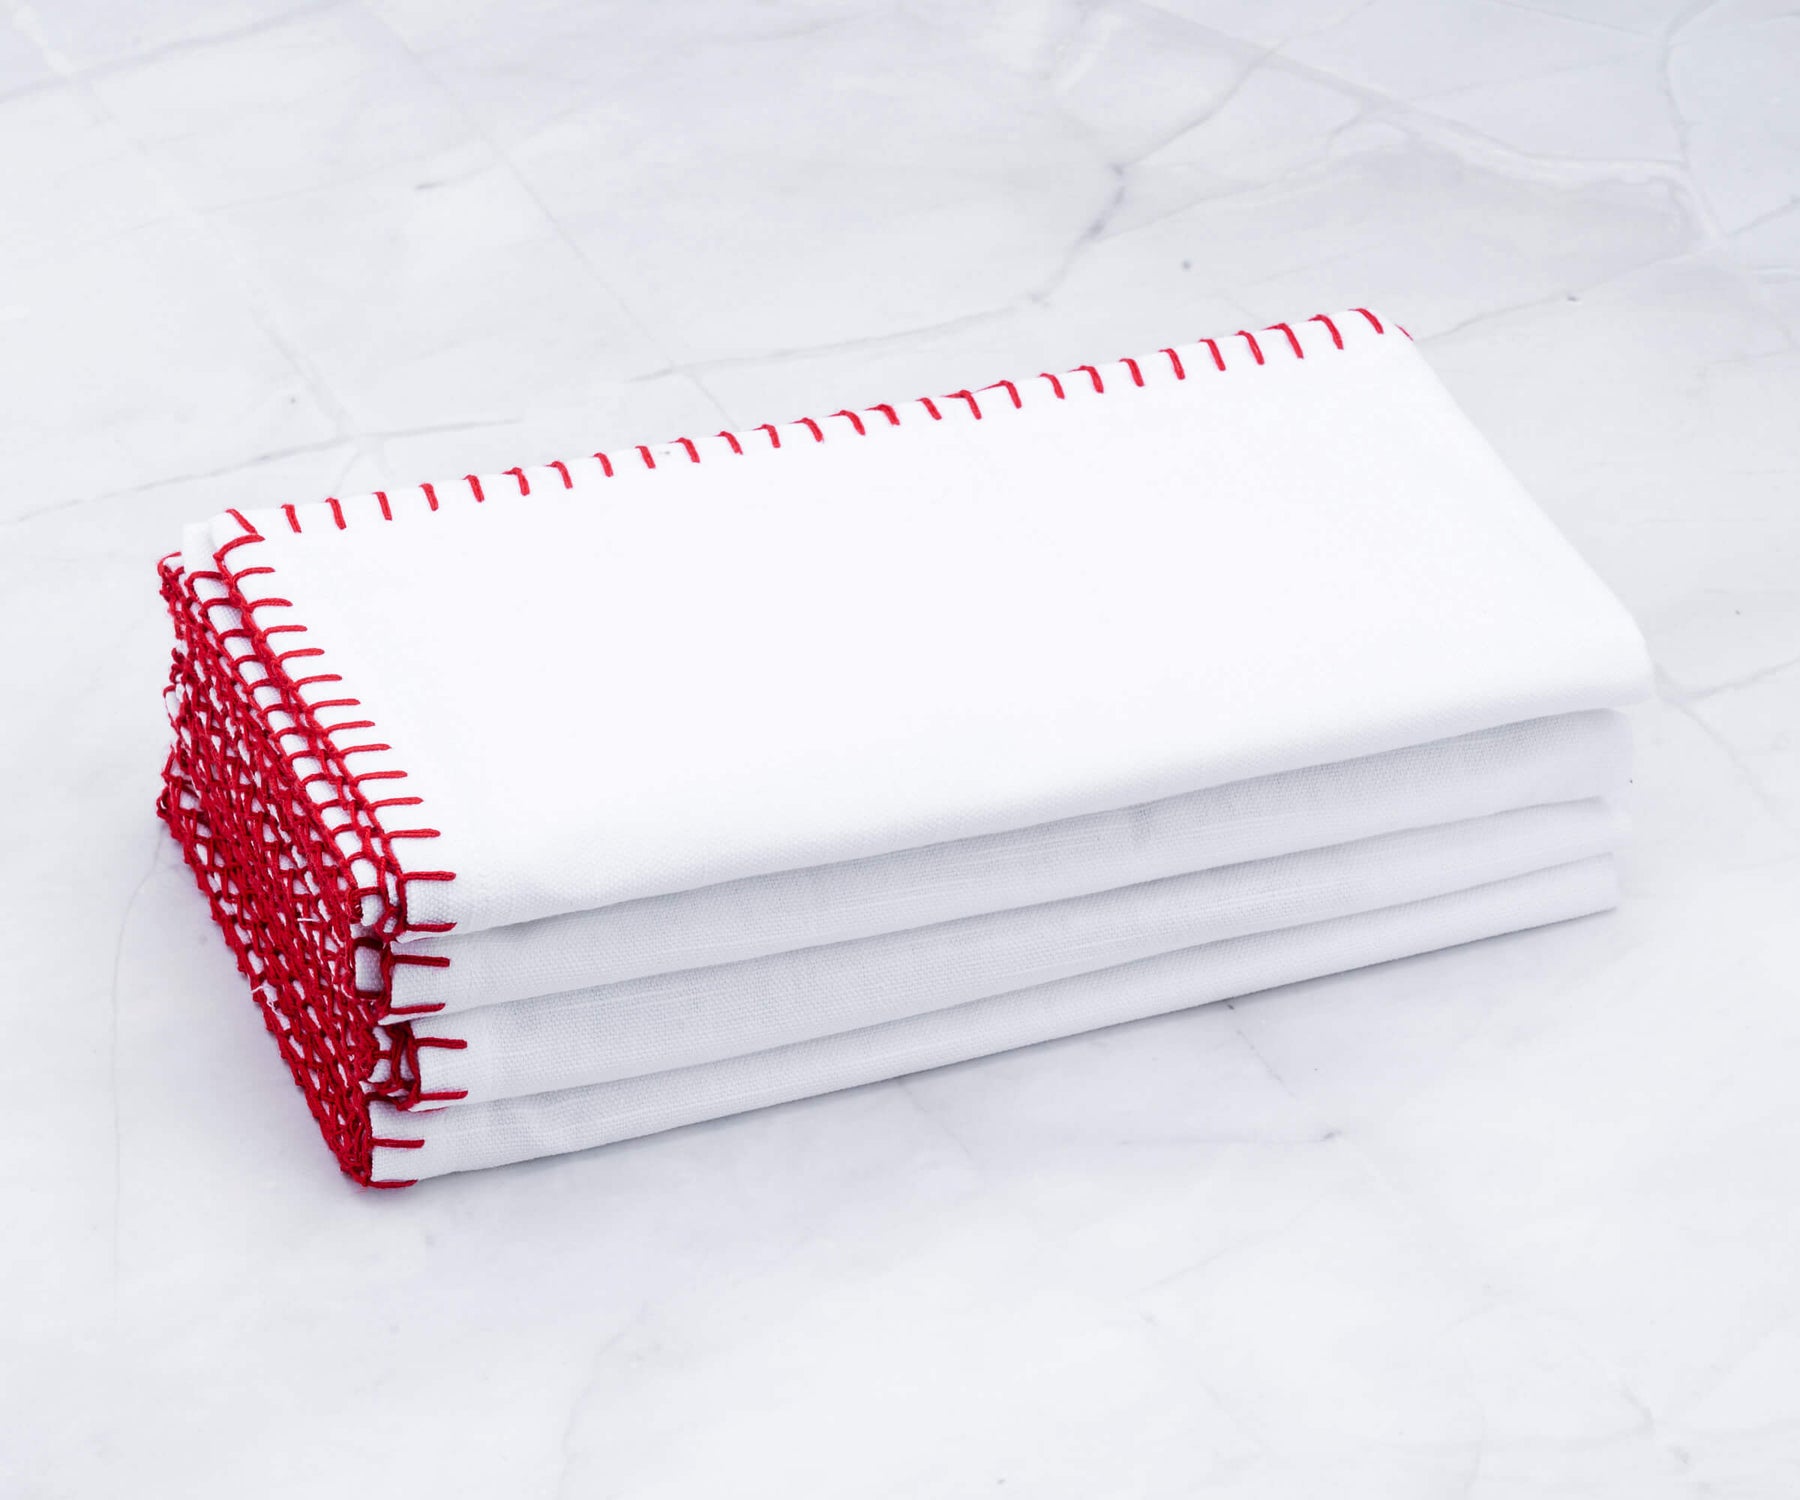 Pile of shell edge wedding napkins with decorative red stitching